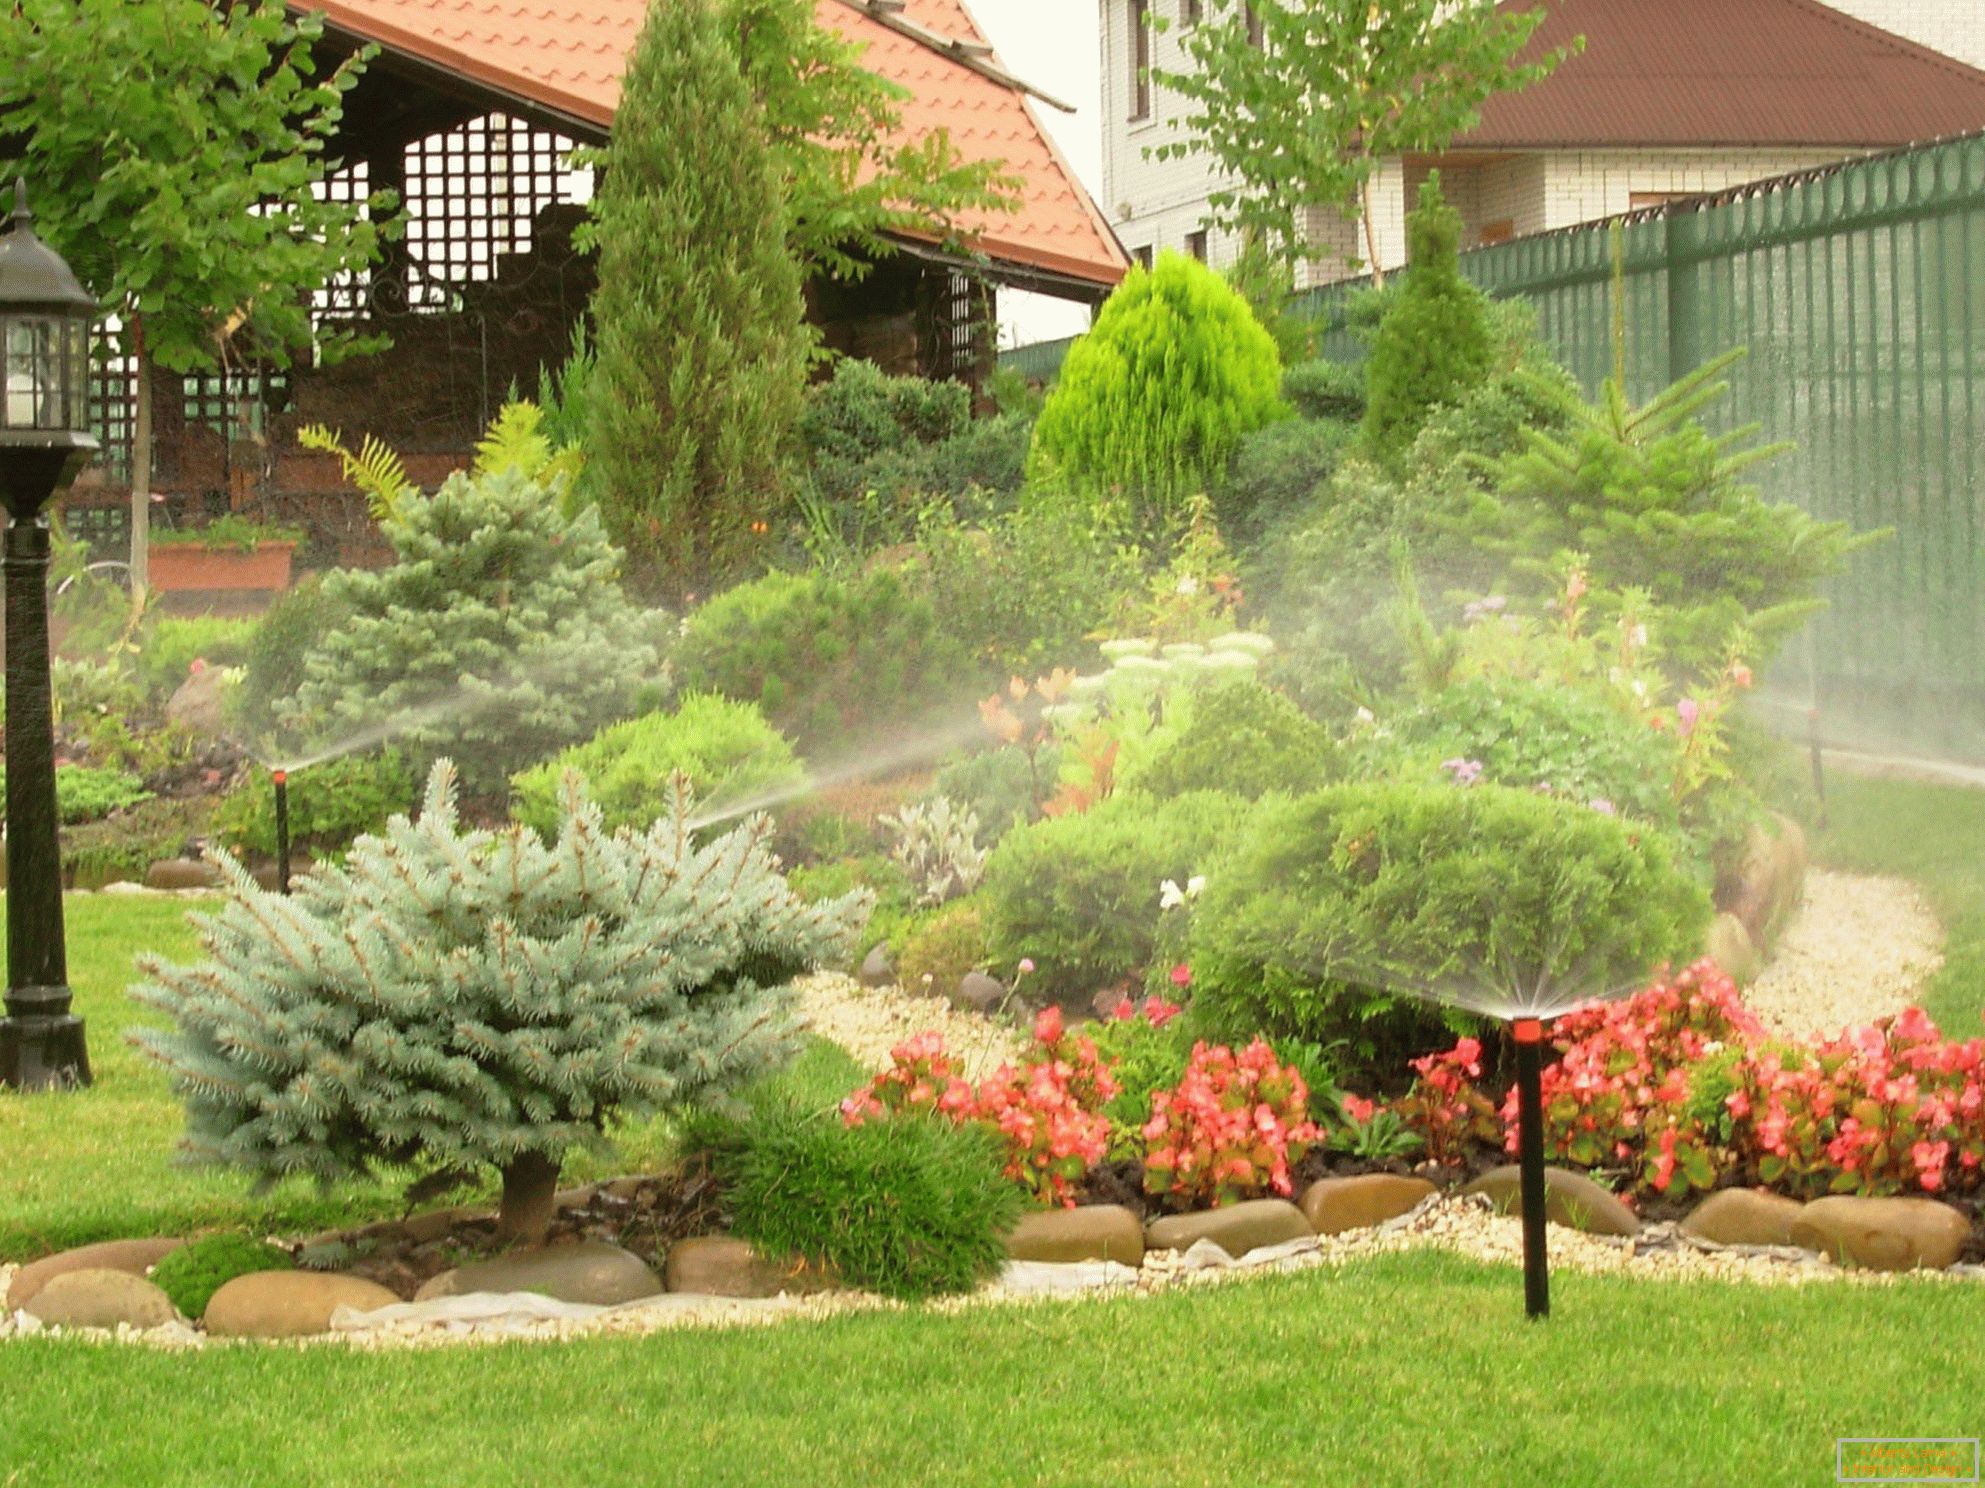 Lawn sprinklers and flower beds